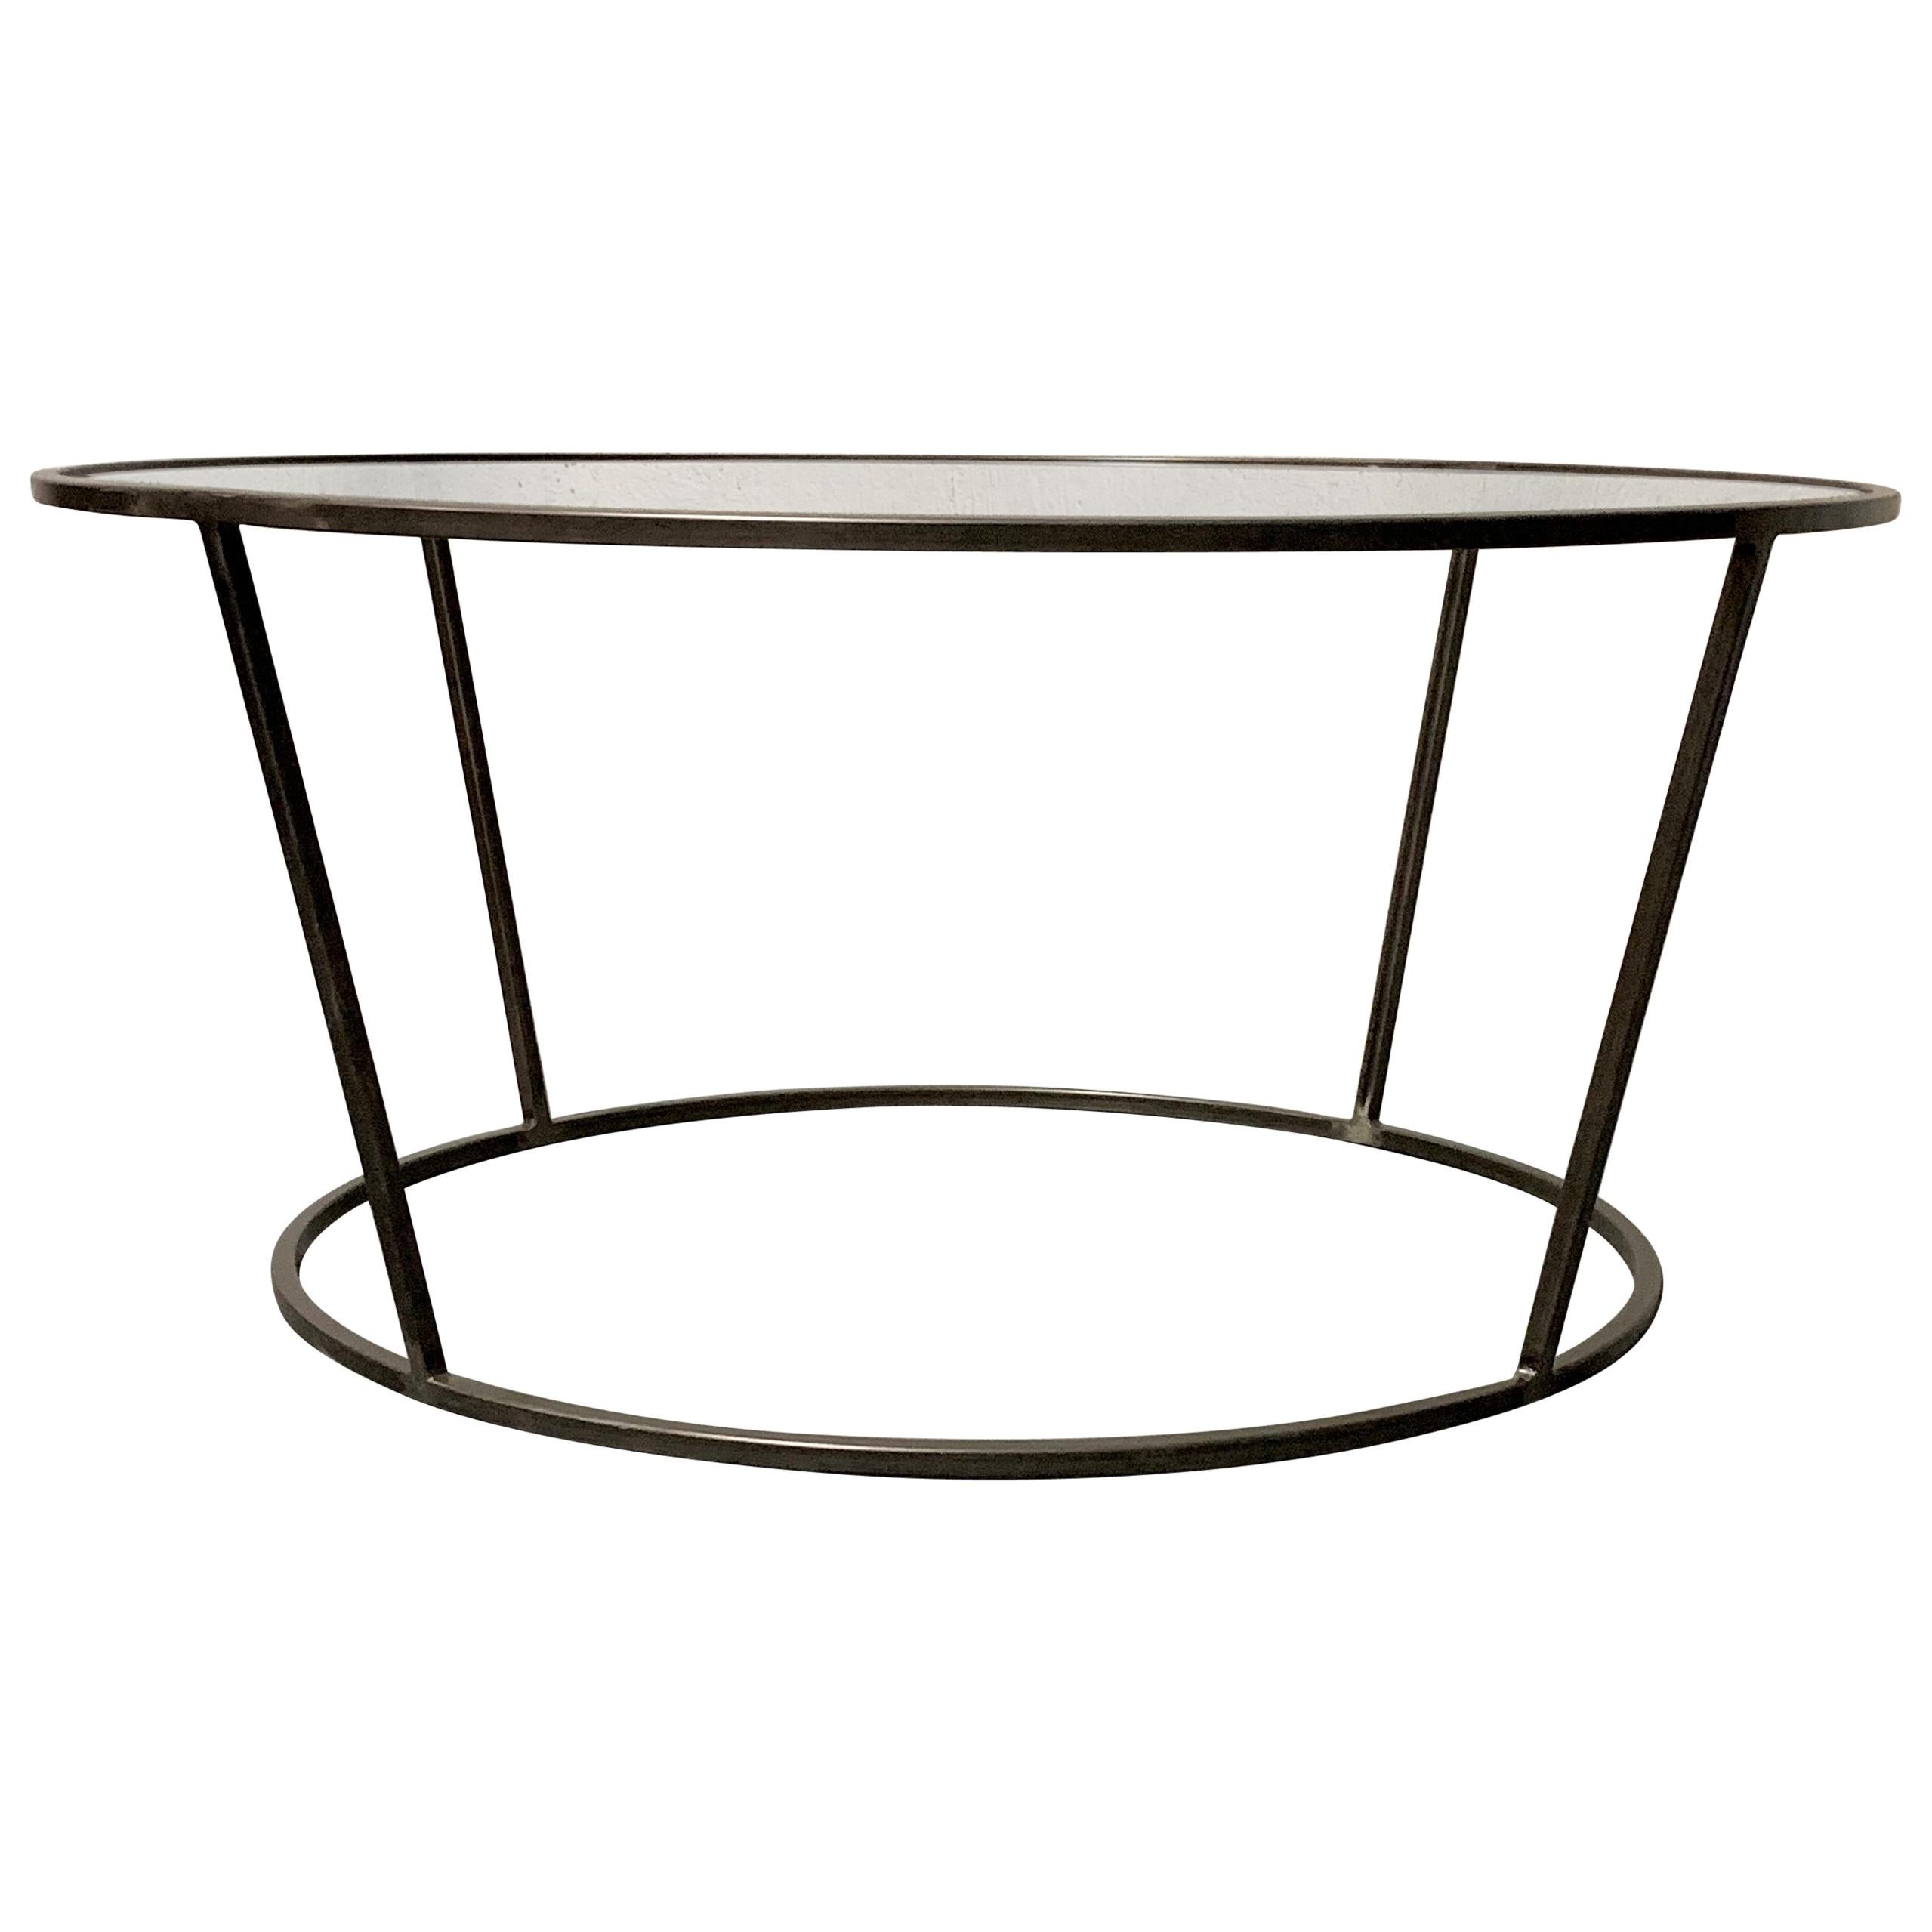 New Round Coffee Table with Metal Structure and Glass Top